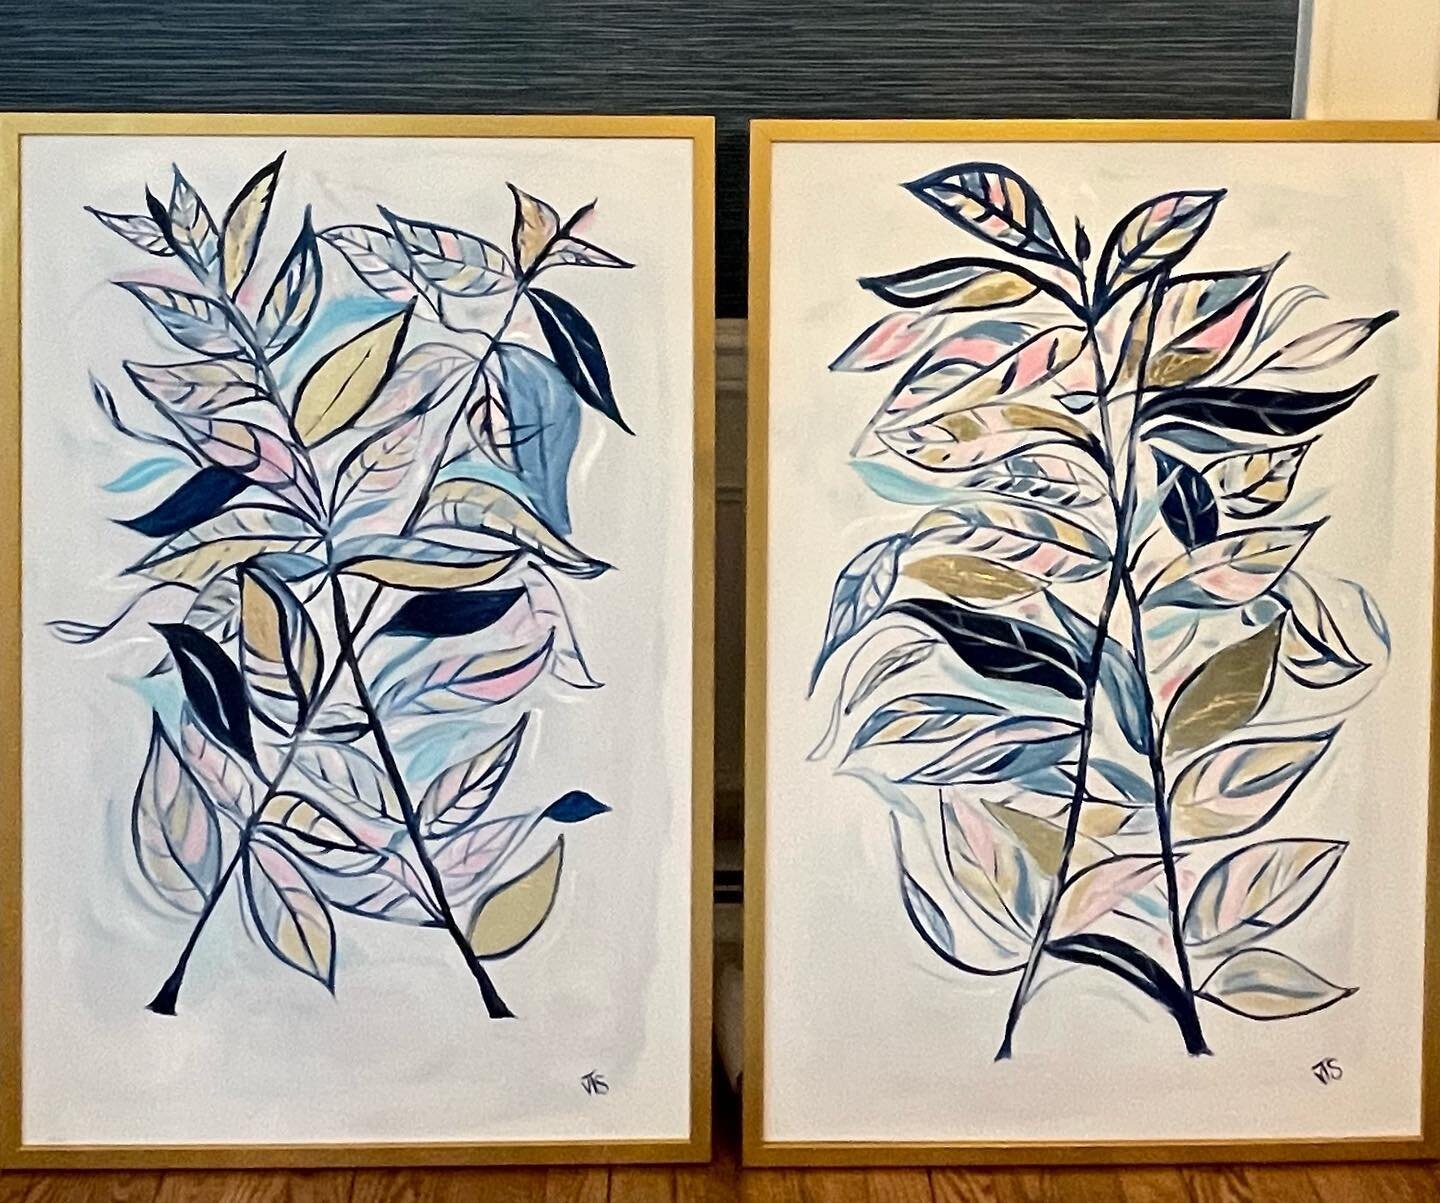 Commissioned pair of &ldquo;abstract botanicals&rdquo; to match a beautiful dining room.  Can&rsquo;t wait to see these on the wall... stay tuned.  #abstractbotanical #diningroomdecor #customartwork #glenrock #ridgewoodartist #plantpainting #goldfram